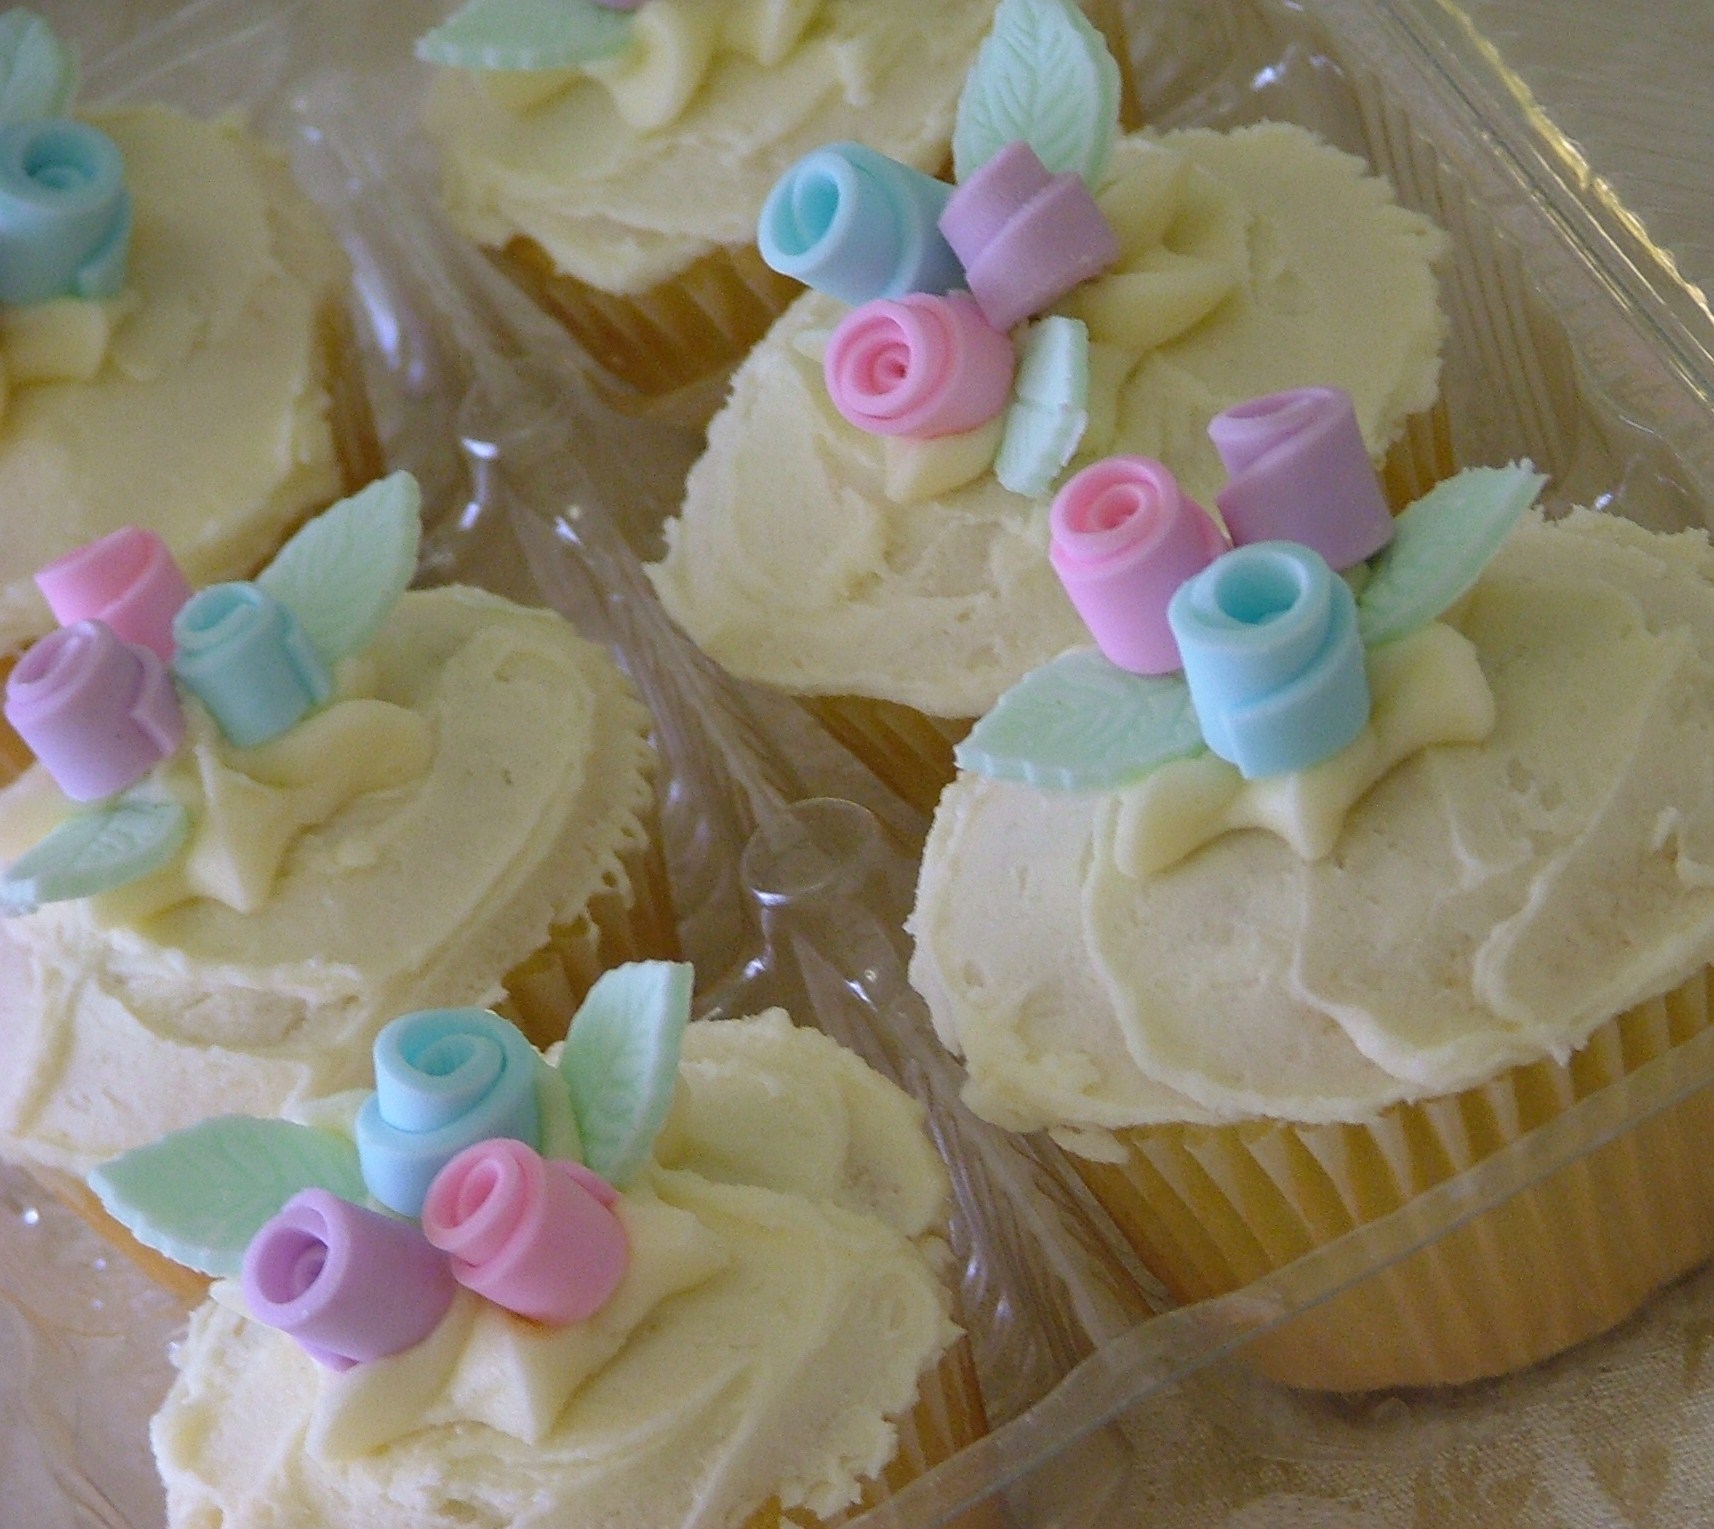 CUPCAKE WORKSHOP FOR 25th JUNE IS FULLY BOOKED